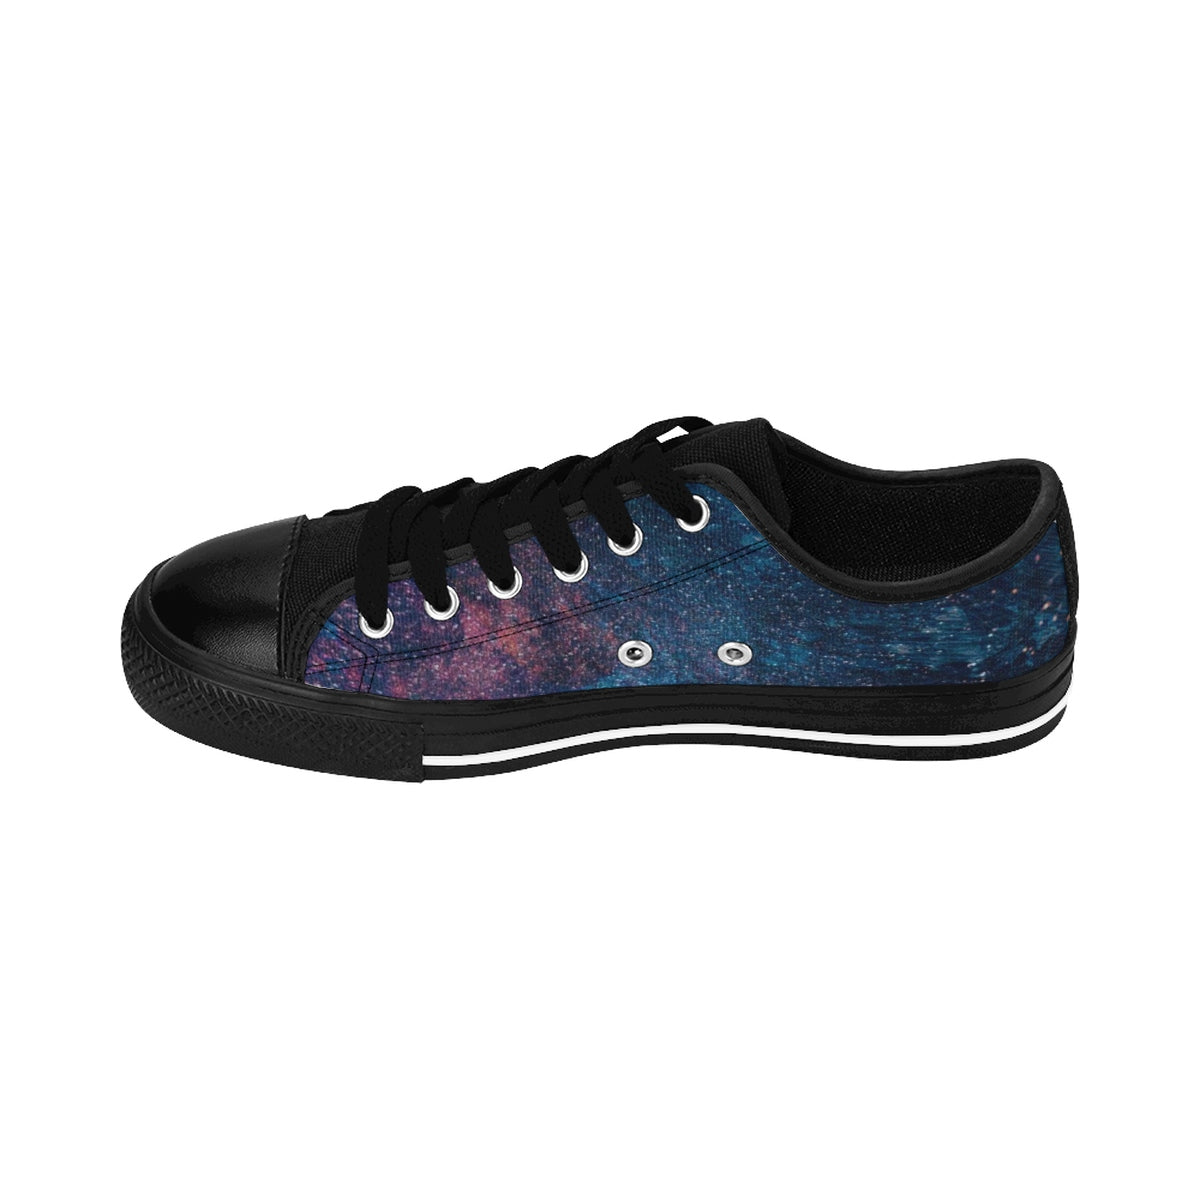 The Sky and Moon Gravity Mens 2019 Sneakers by Xotup Scholar